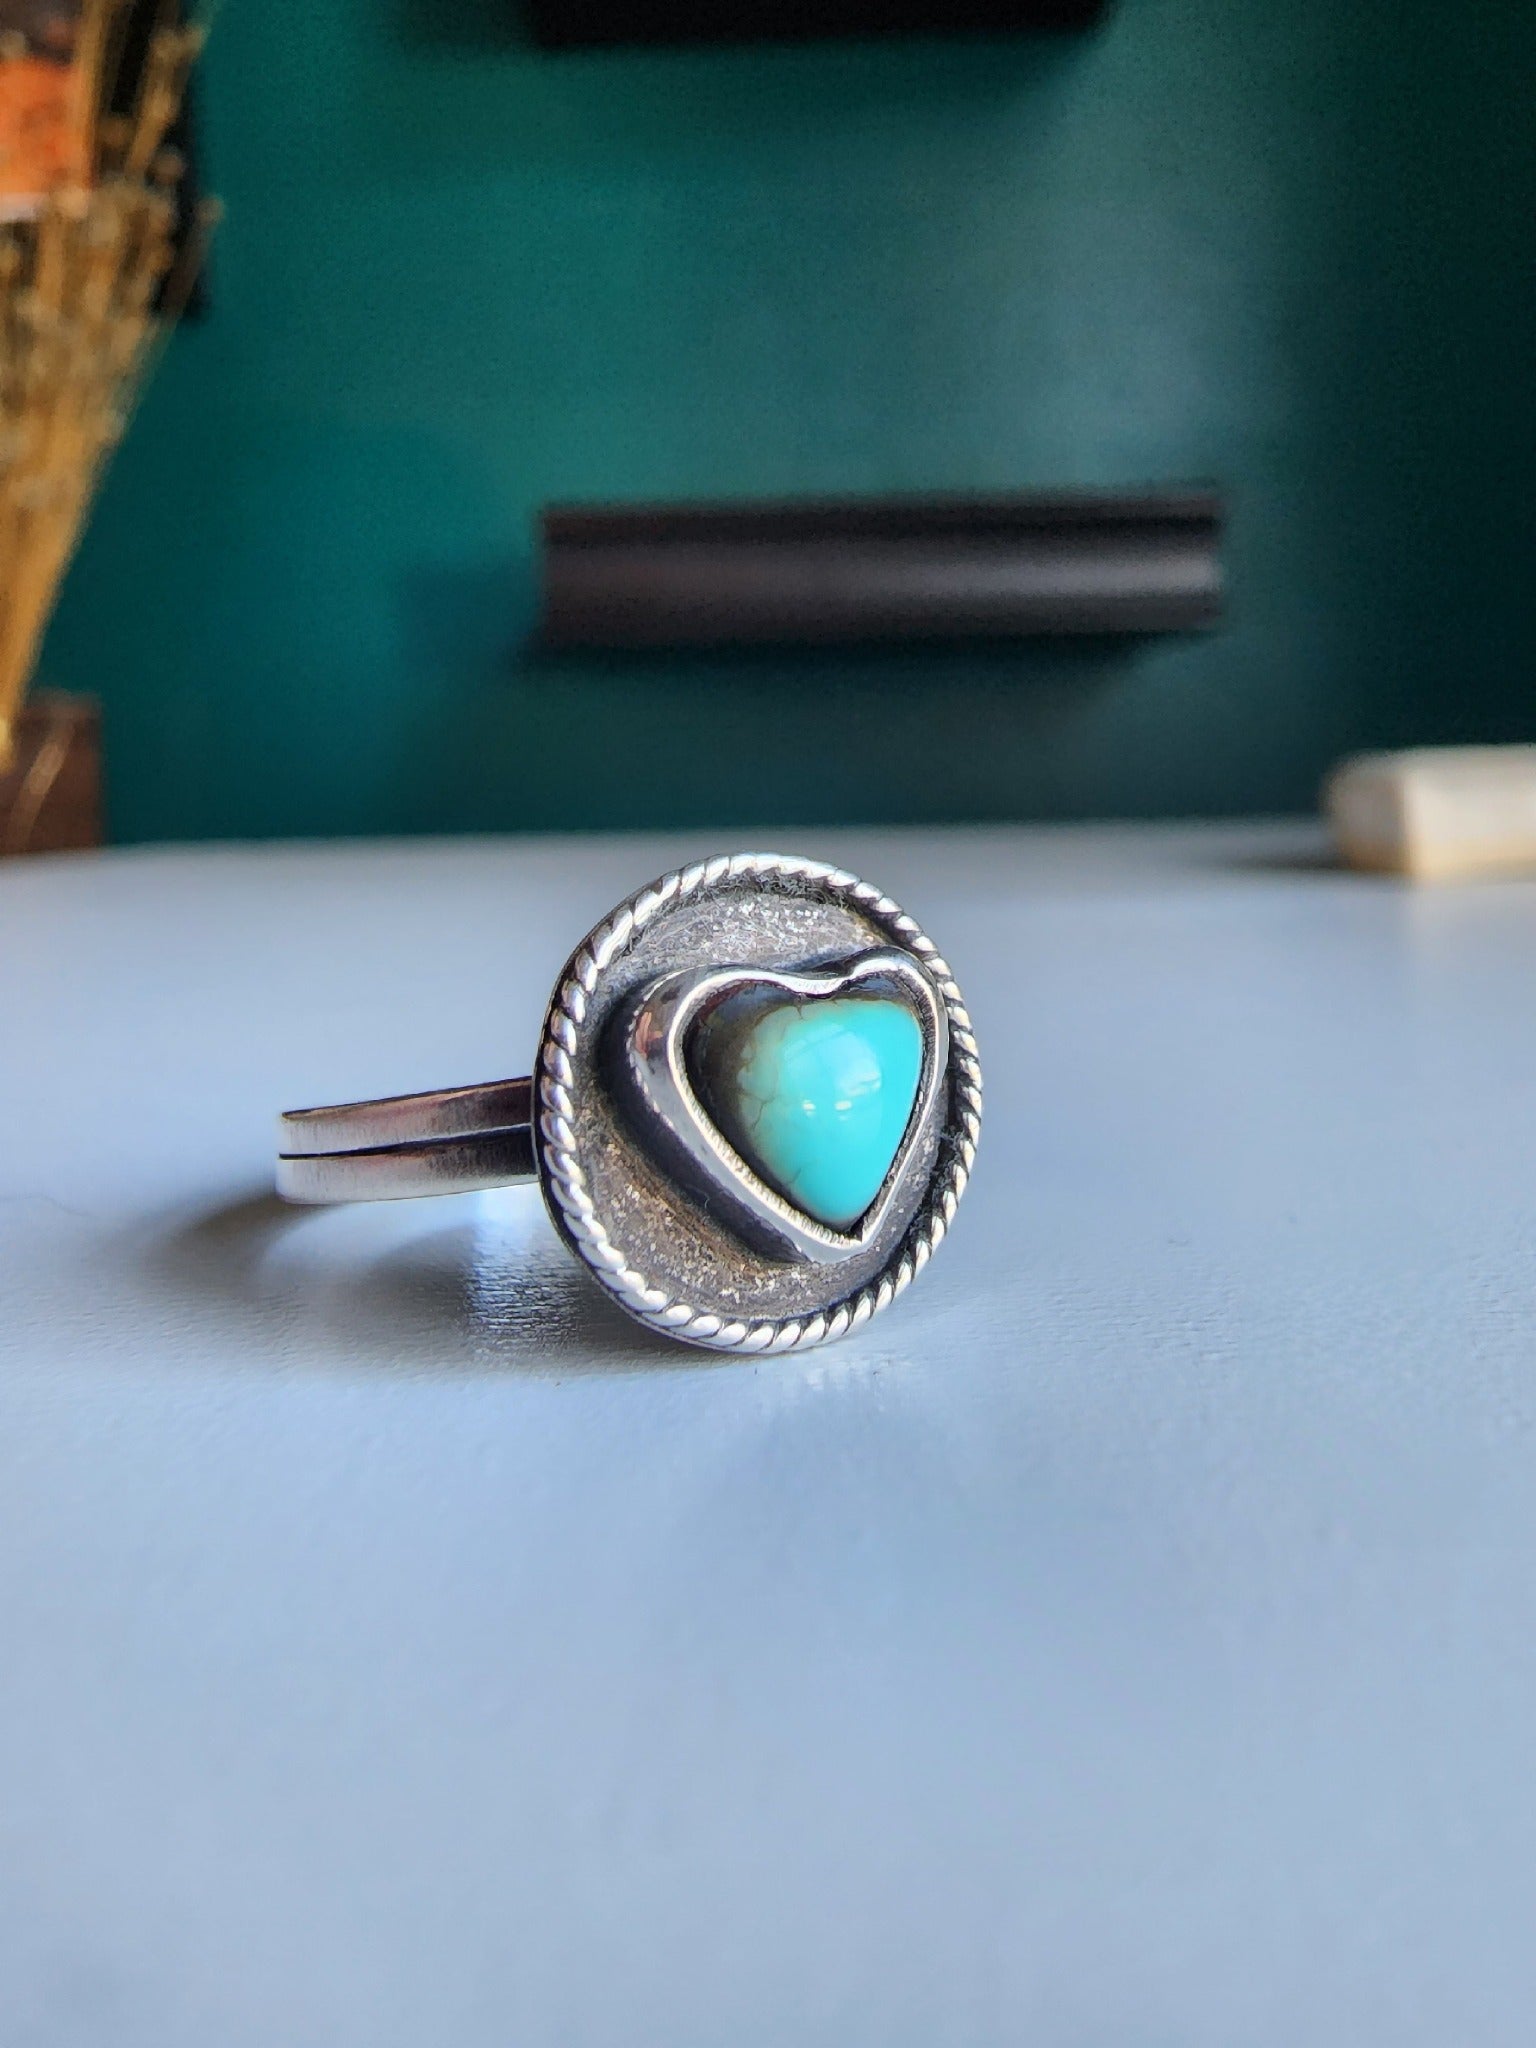 Kingman heart ring with blacked out surround and twisted wire going around. Ring is .925 sterling silver with a double banded shank.